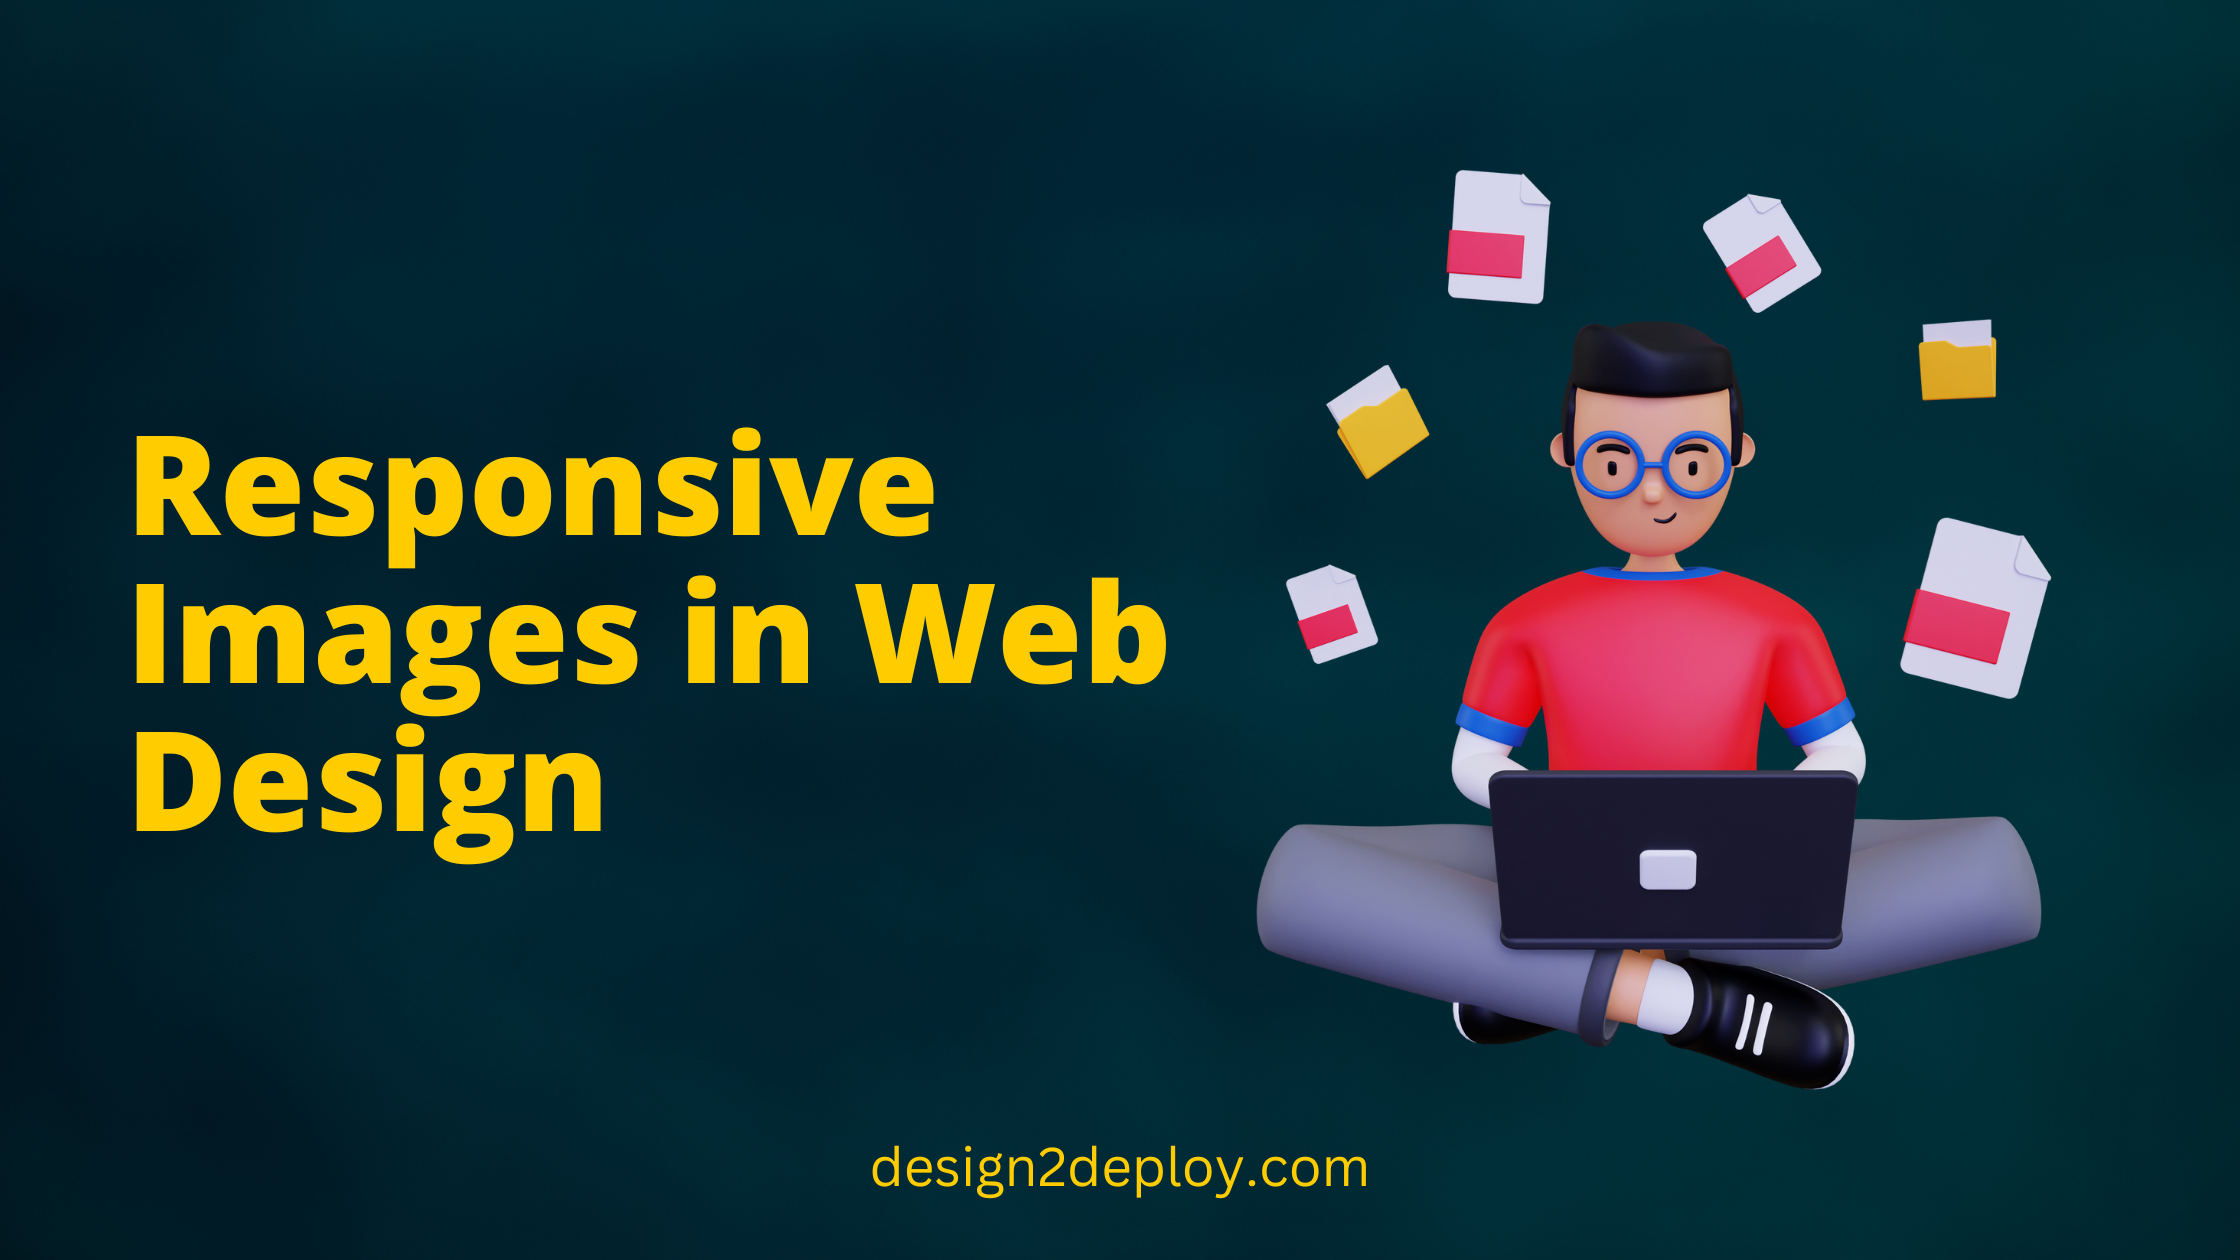 Importance Of Responsive Images in Web Design